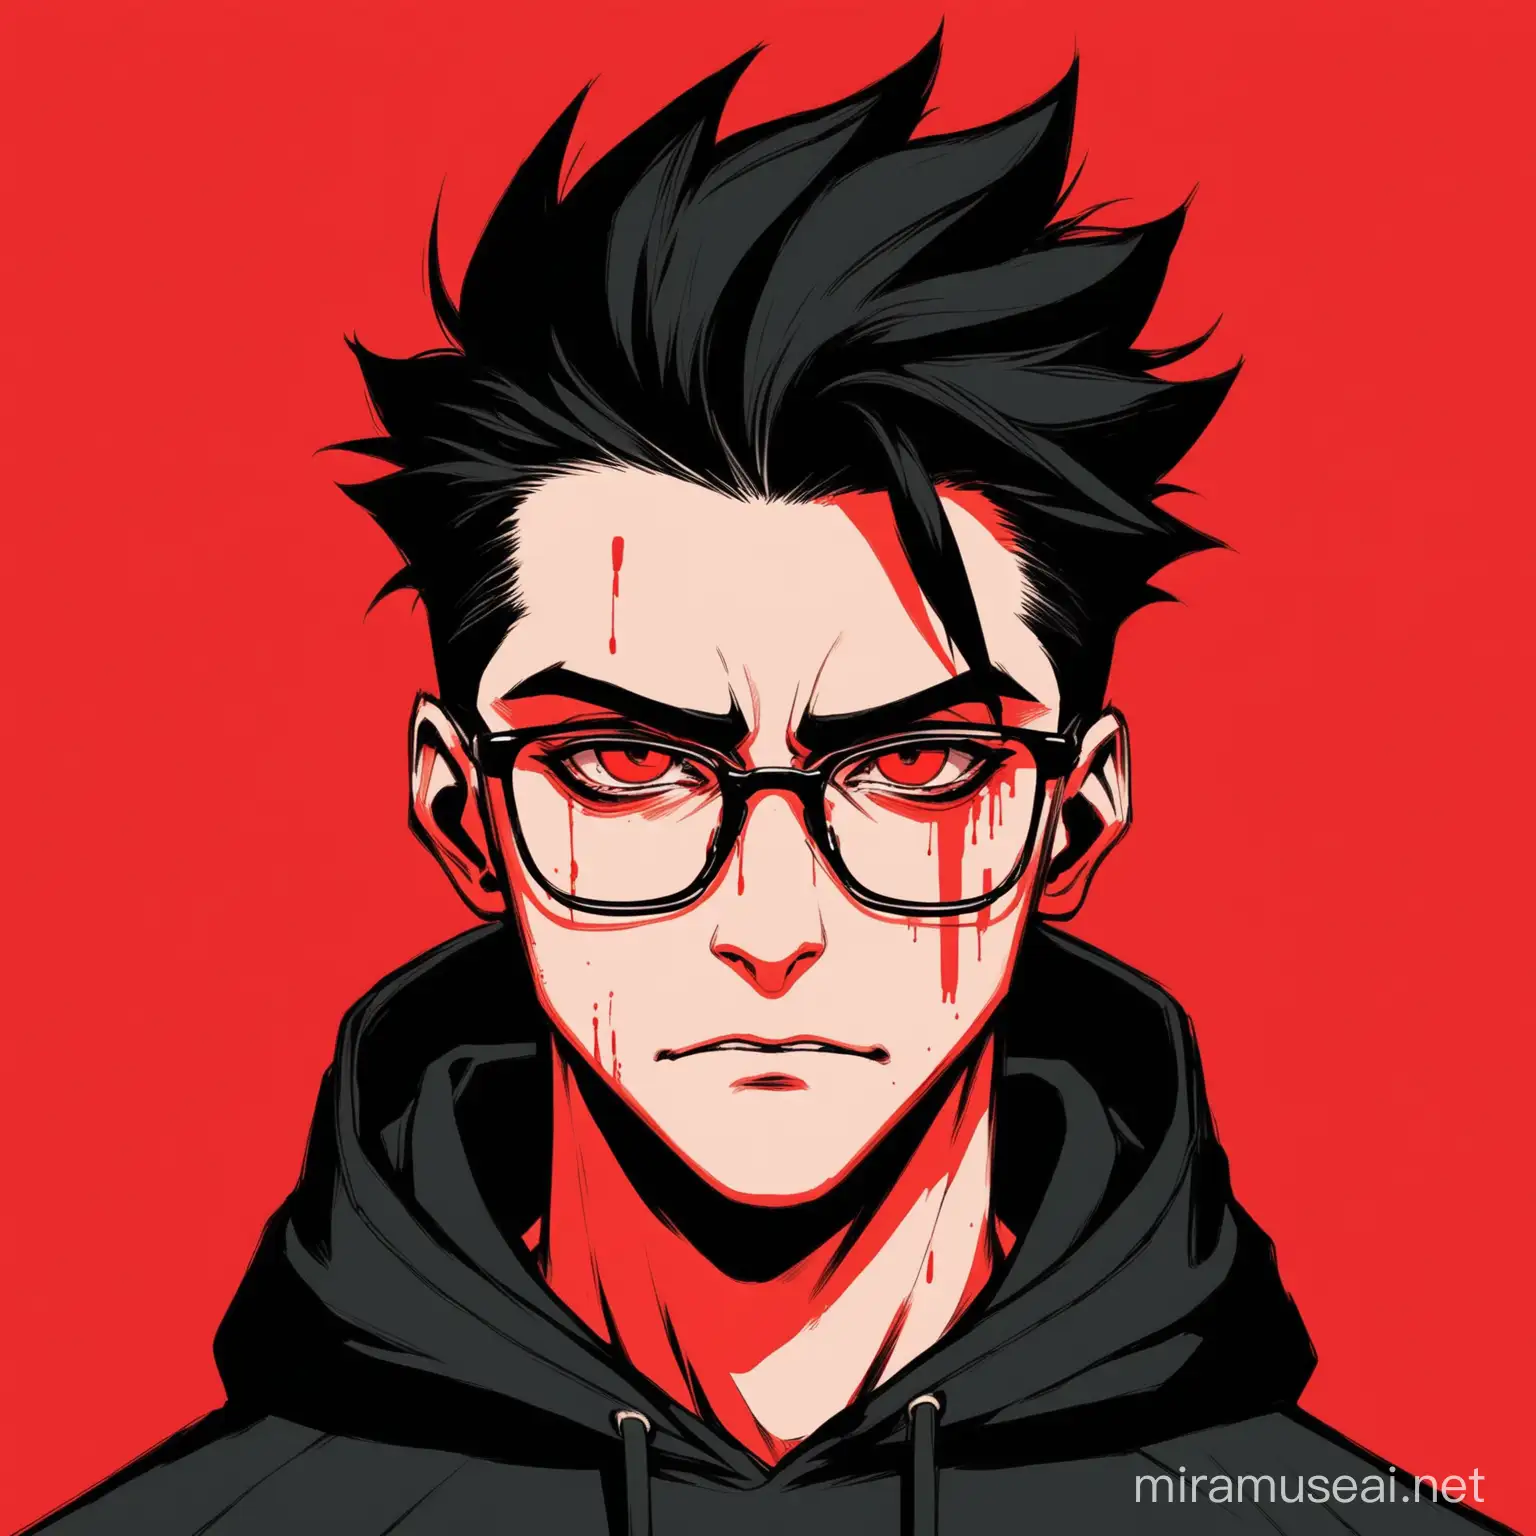 cool,hacker,black hoodie,quiff hairs,glasses,oblong face shape,big nose,small mouth,handsome,aesthetic,psycho,red background,face with blood